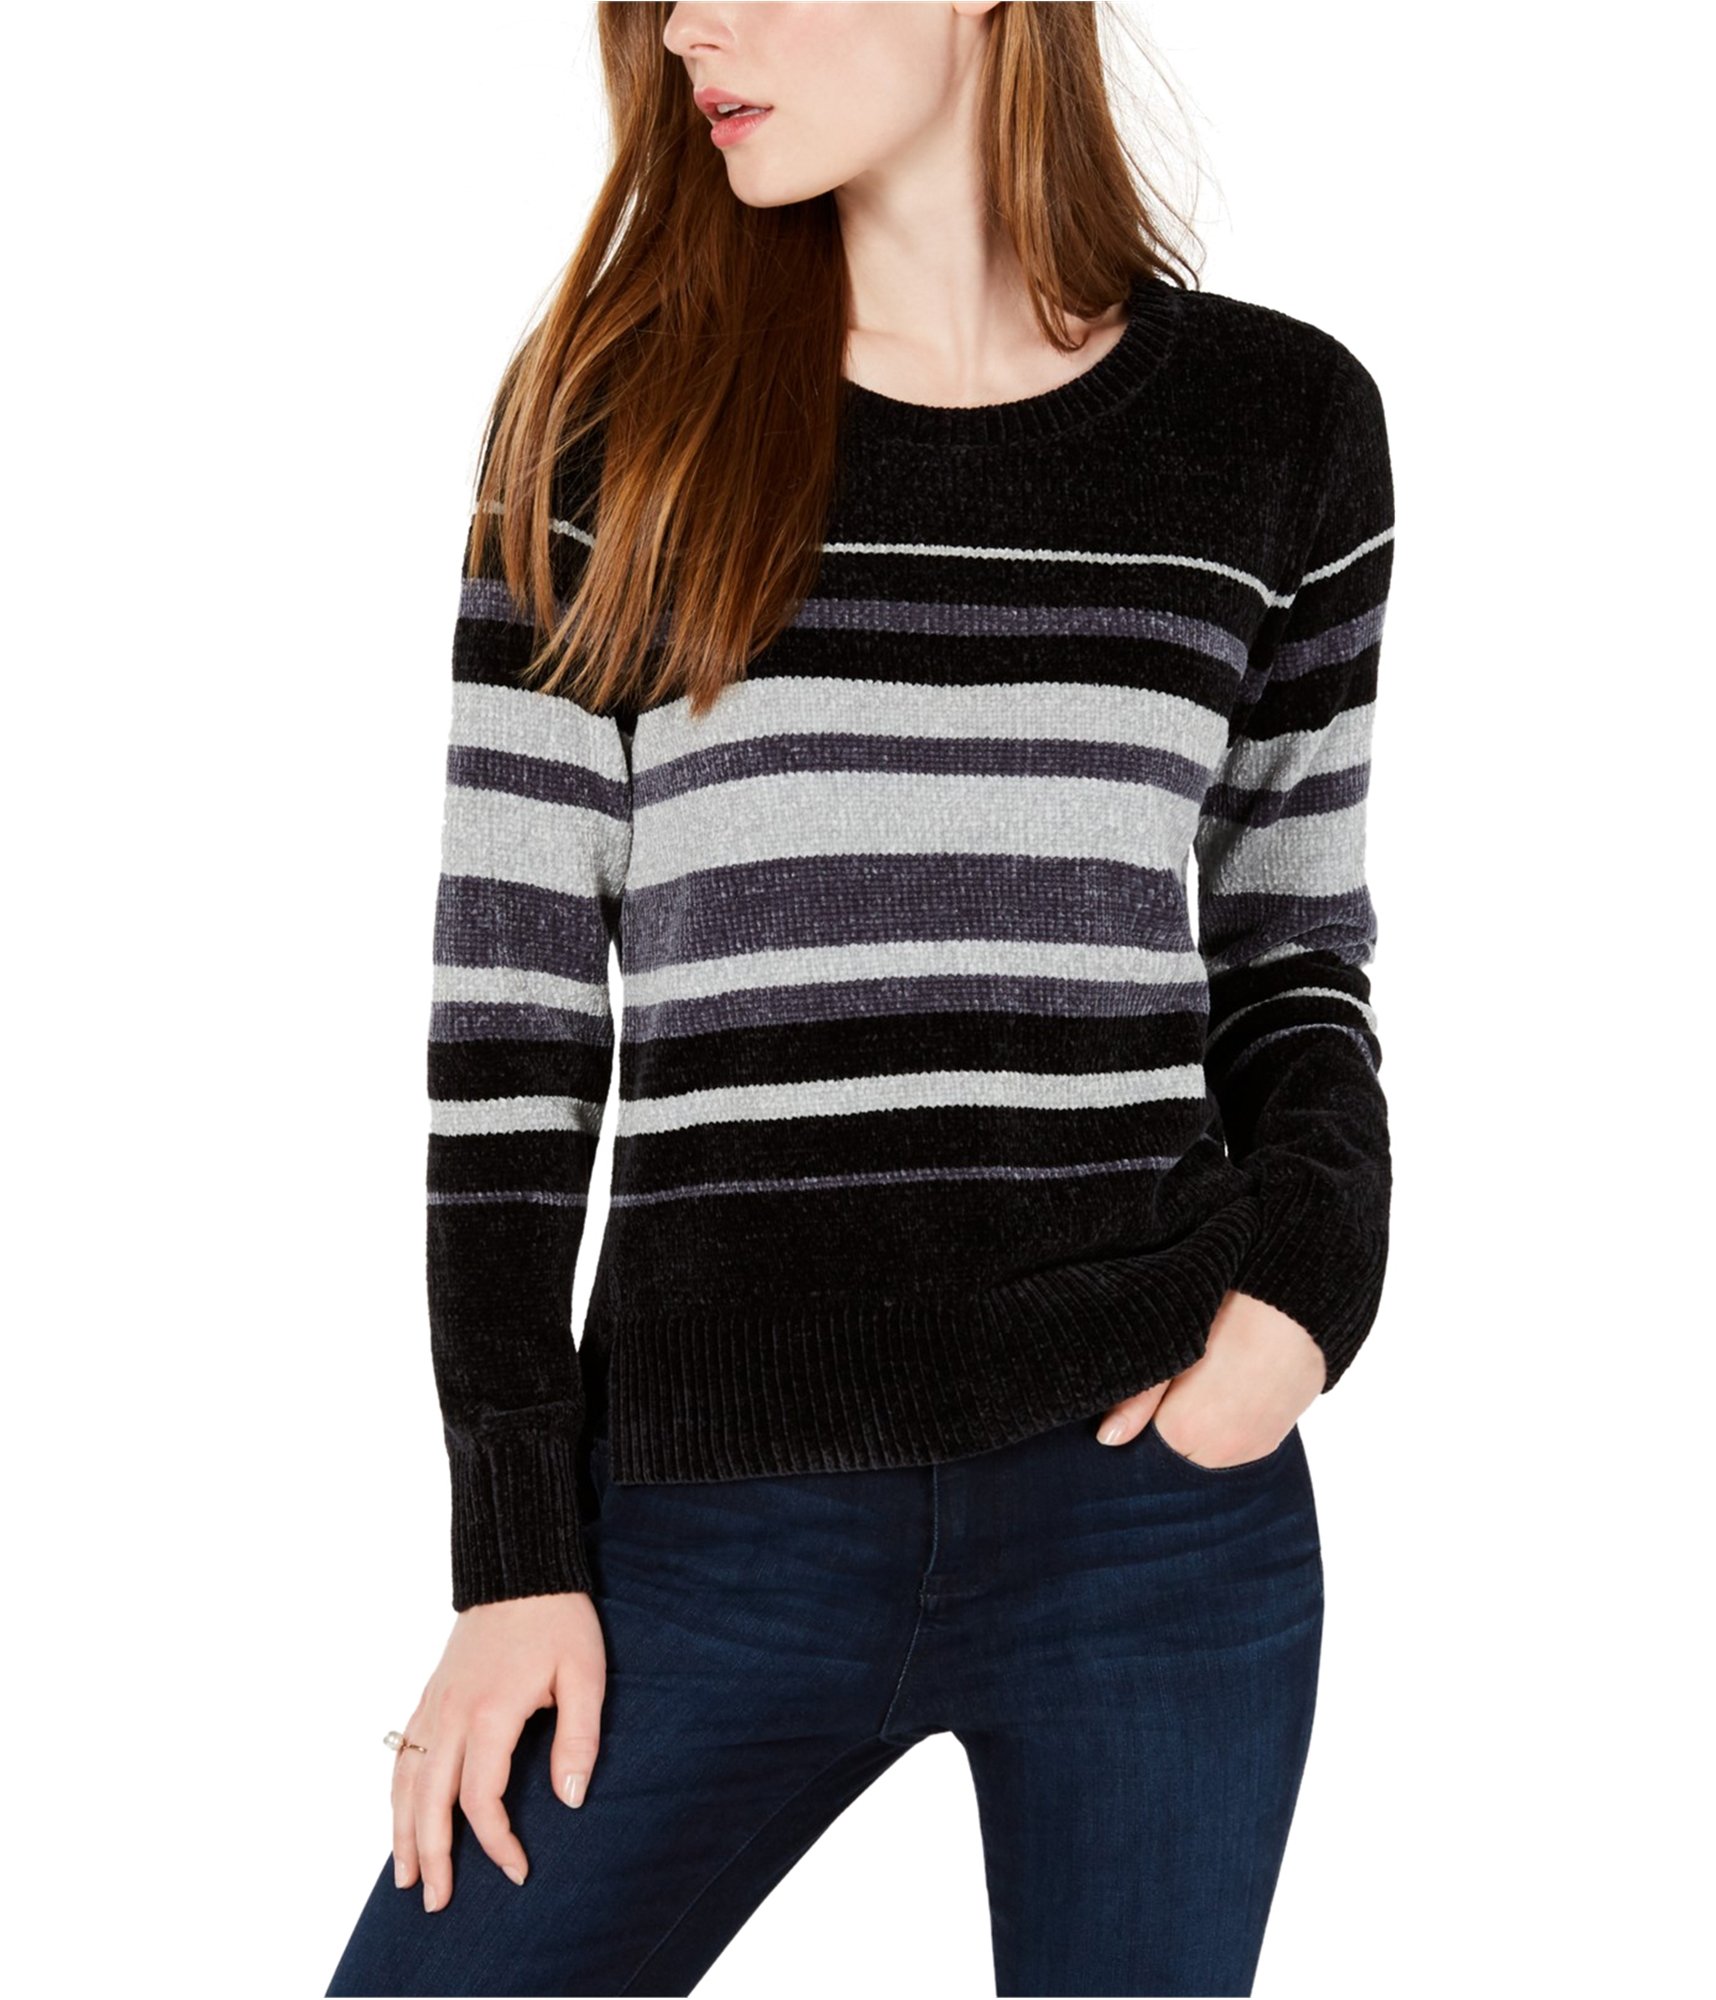 Woman-wearing-pullover-sweater